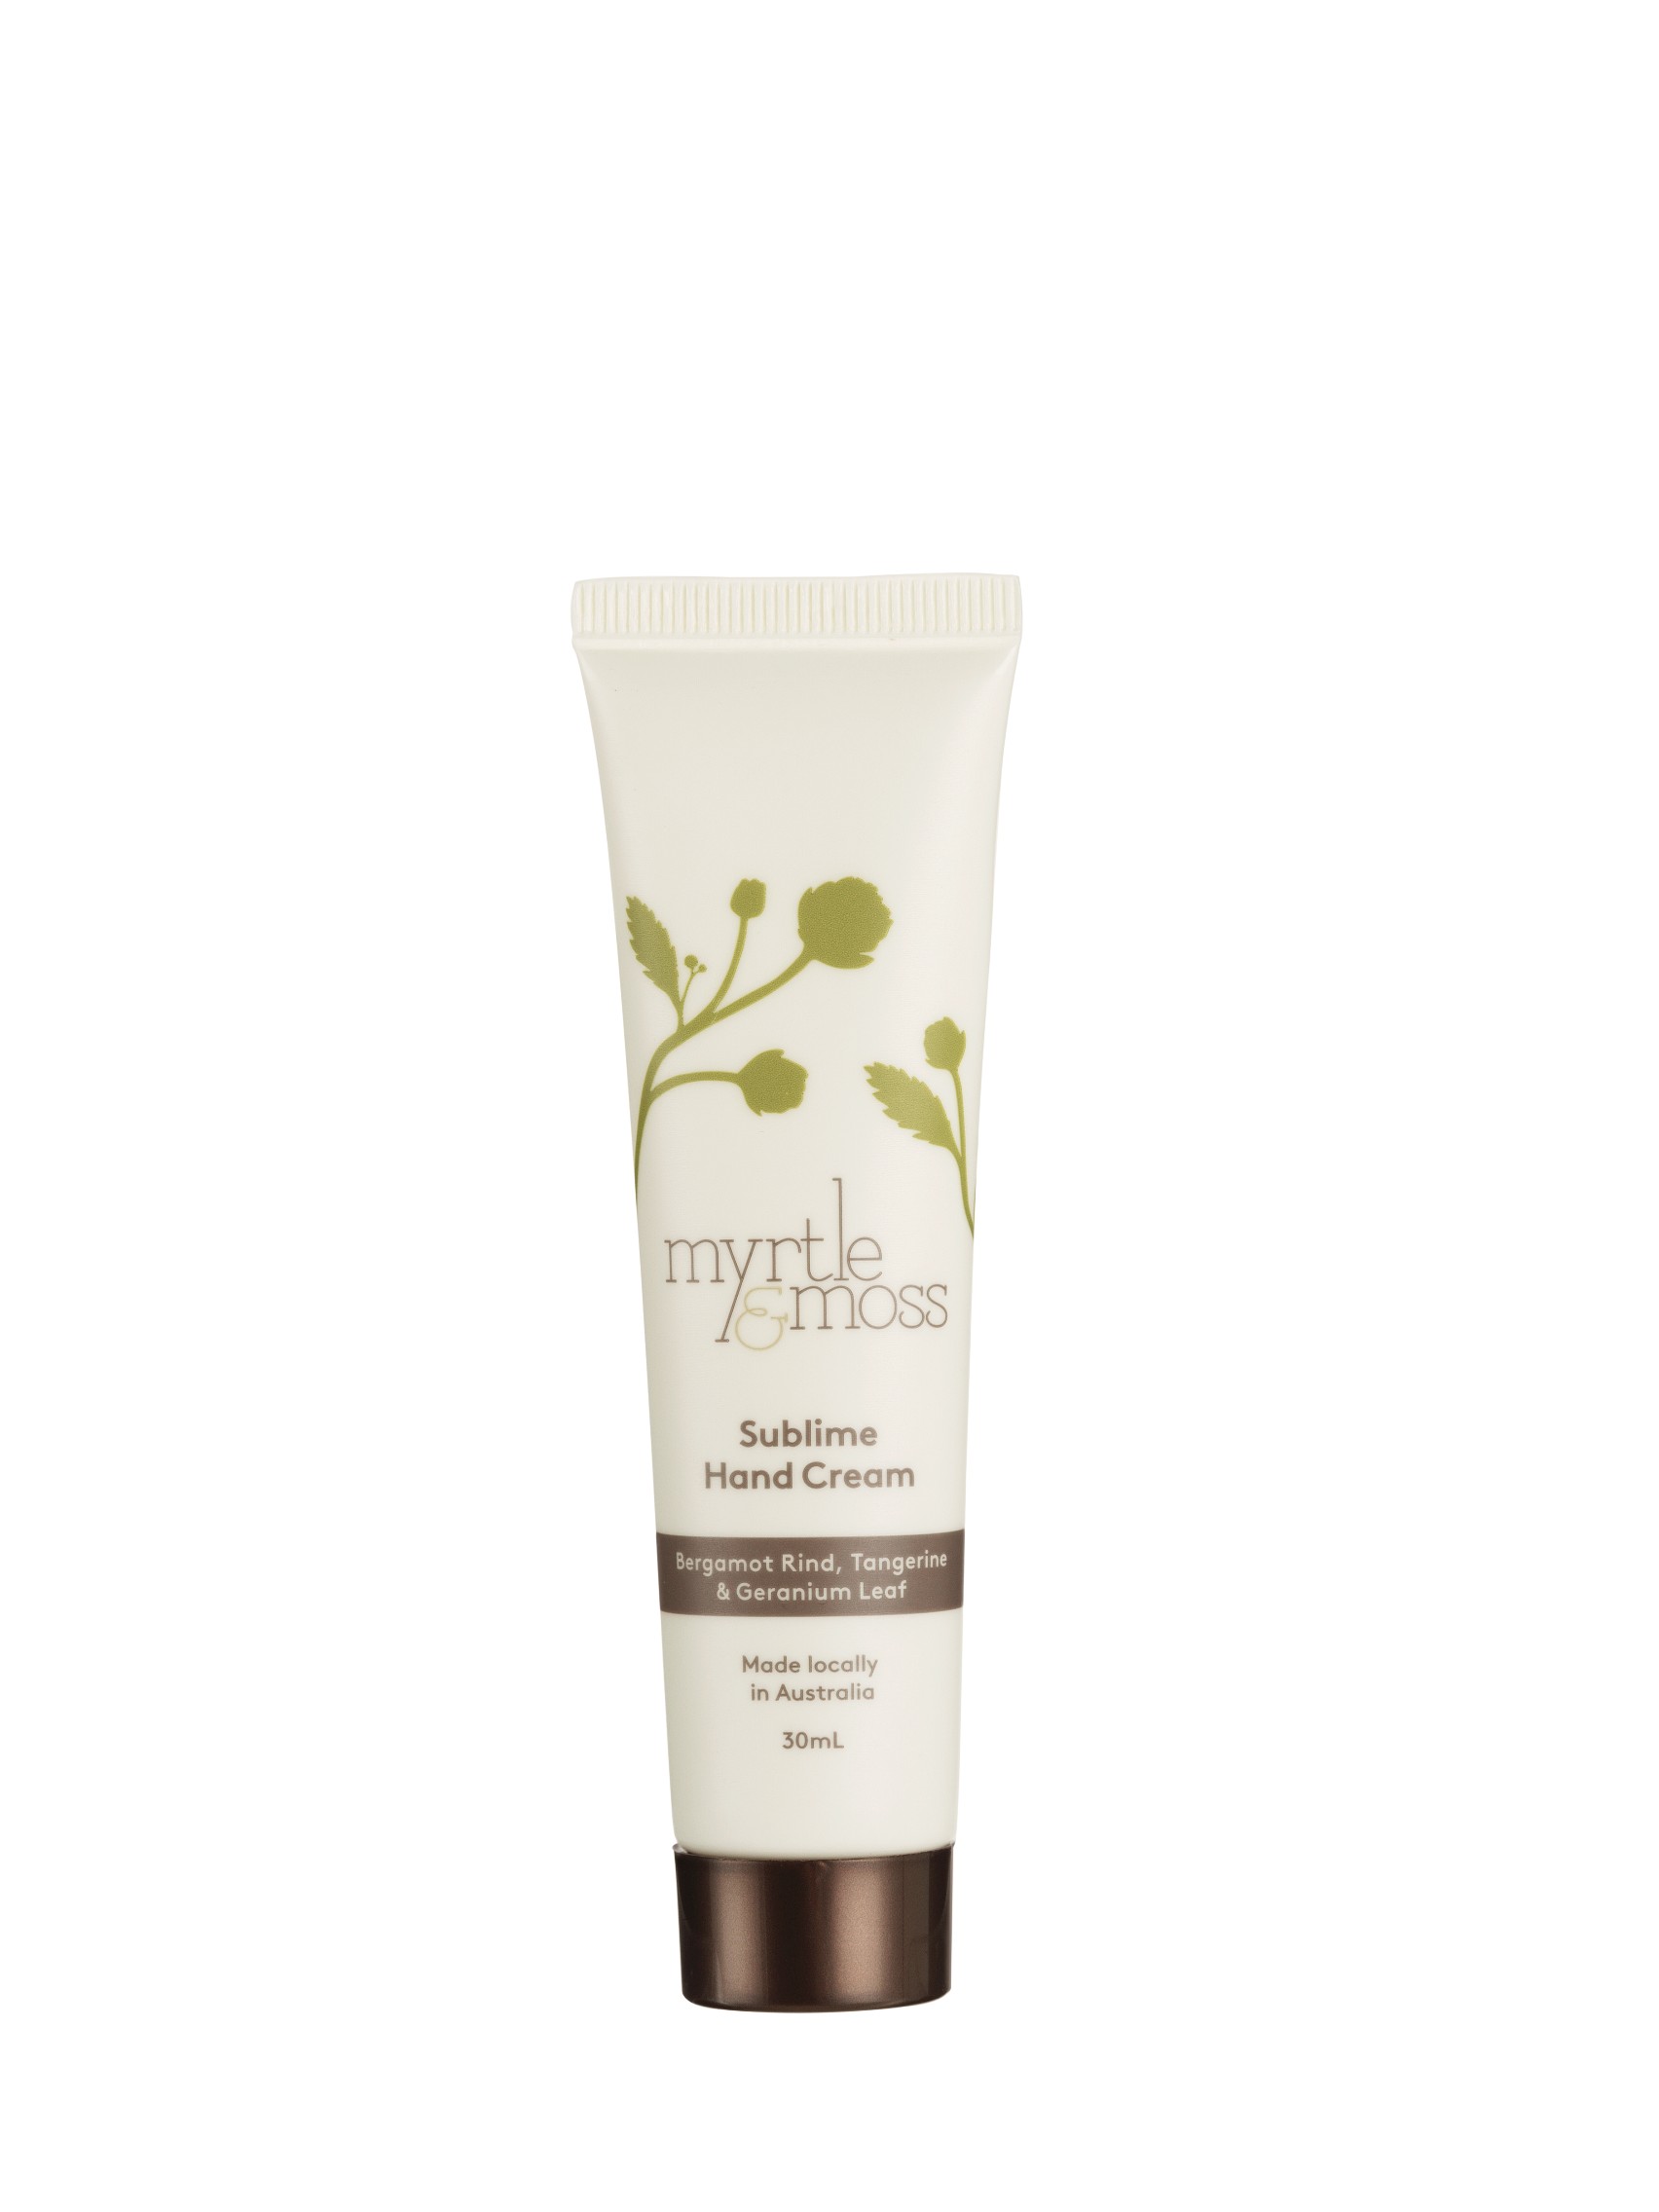 Myrtle & Moss sublime Hand cream 30ml - Donvale Flower Gallery